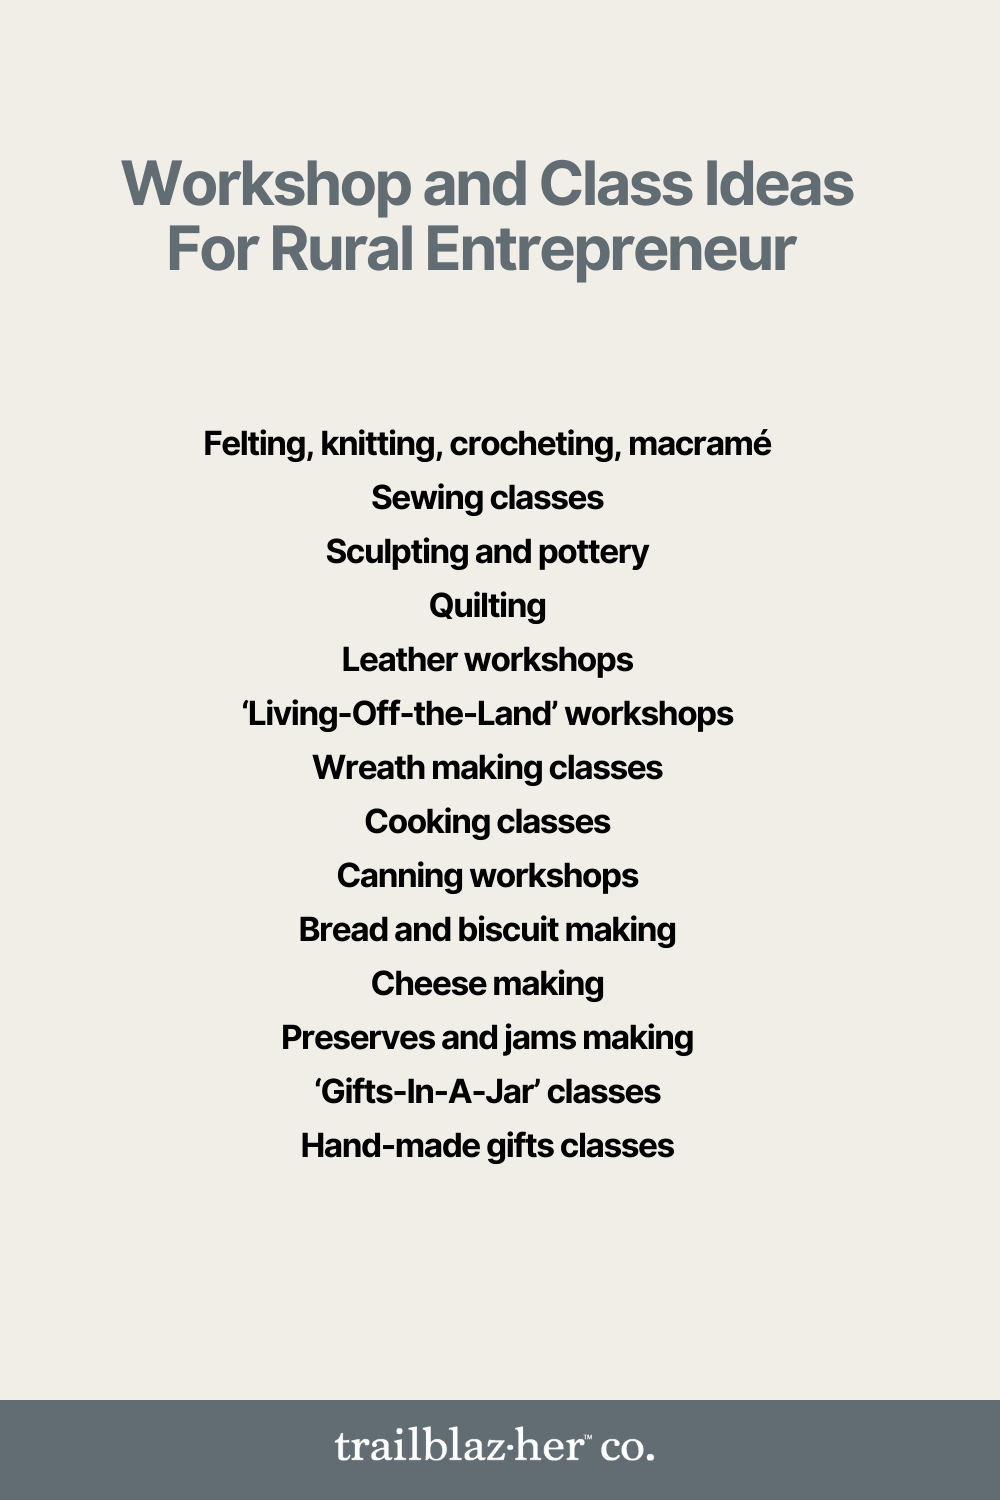 Workshop and class ideas for rural business owners